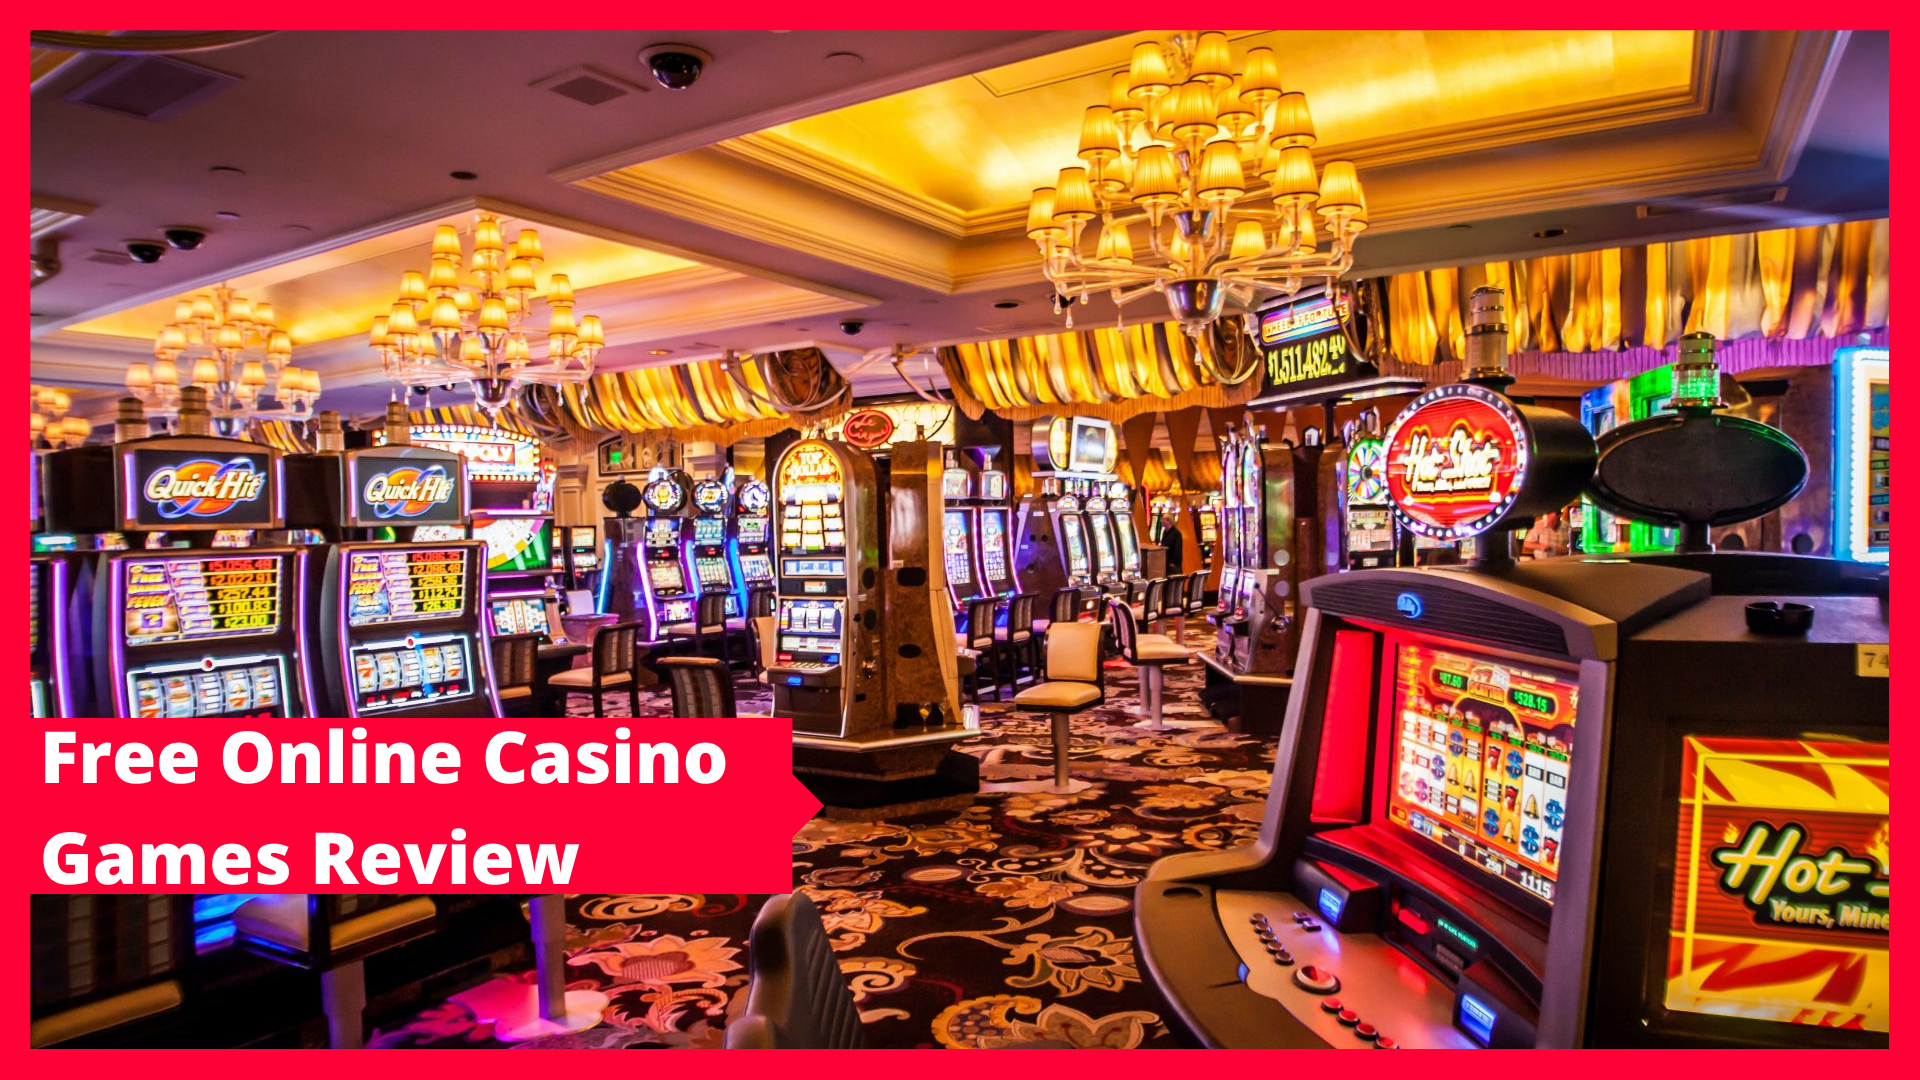 Casino games review